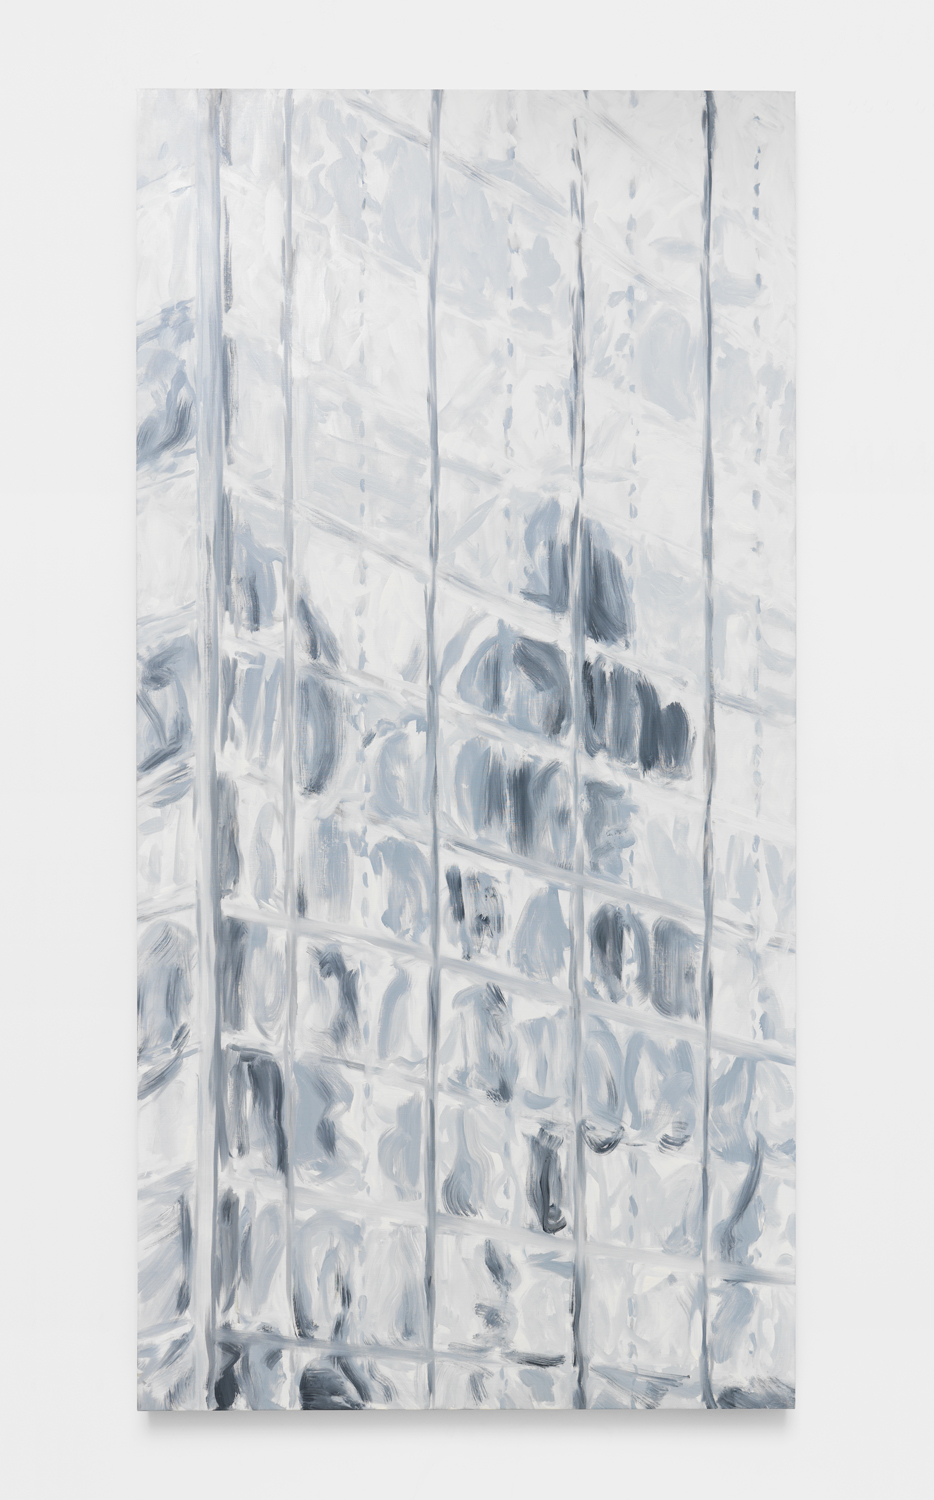 Martha Diamond, Cityscape, 2000, Oil on linen, 96h x 48w in, Exhibited at Independent NY, Magenta Plains, New York, NY, September 9–12, 2021.